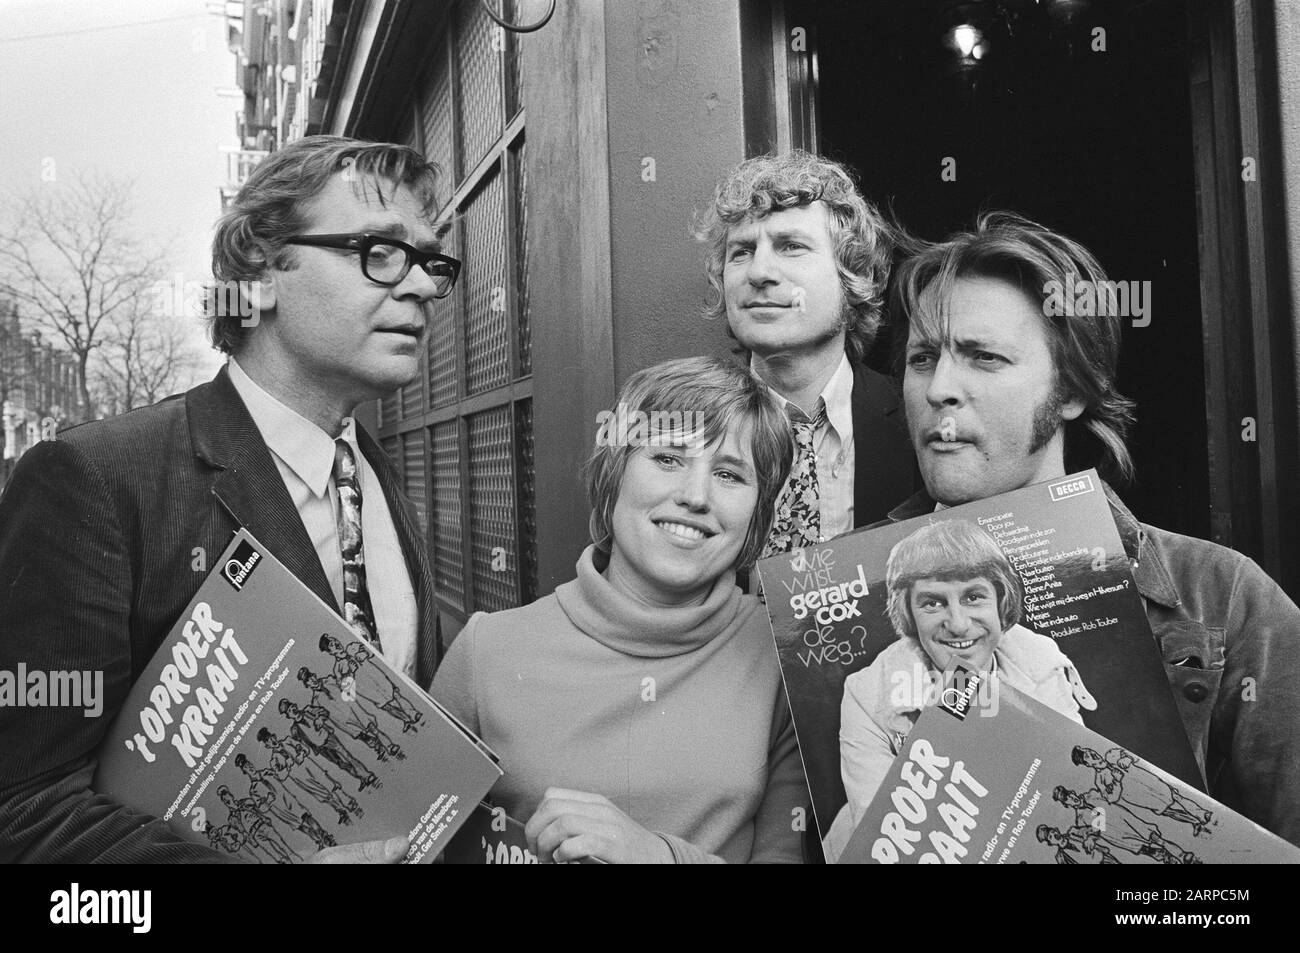 New album by Gerard Cox ('Wie points Gerard Cox de road') and Jaap van de Merwe ('Riot crow') in Amsterdam  V.l.n.r. Jaap van de Merwe, Jenny Arean, Gerard Cox and Rob Touber Date: 30 March 1971 Location: Amsterdam, Noord-Holland Keywords: gramophone records, musicians, singers Personal name: Arean, Jenny, Cox, Gerard, Merwe, Jaap van de, Touber, Rob Stock Photo